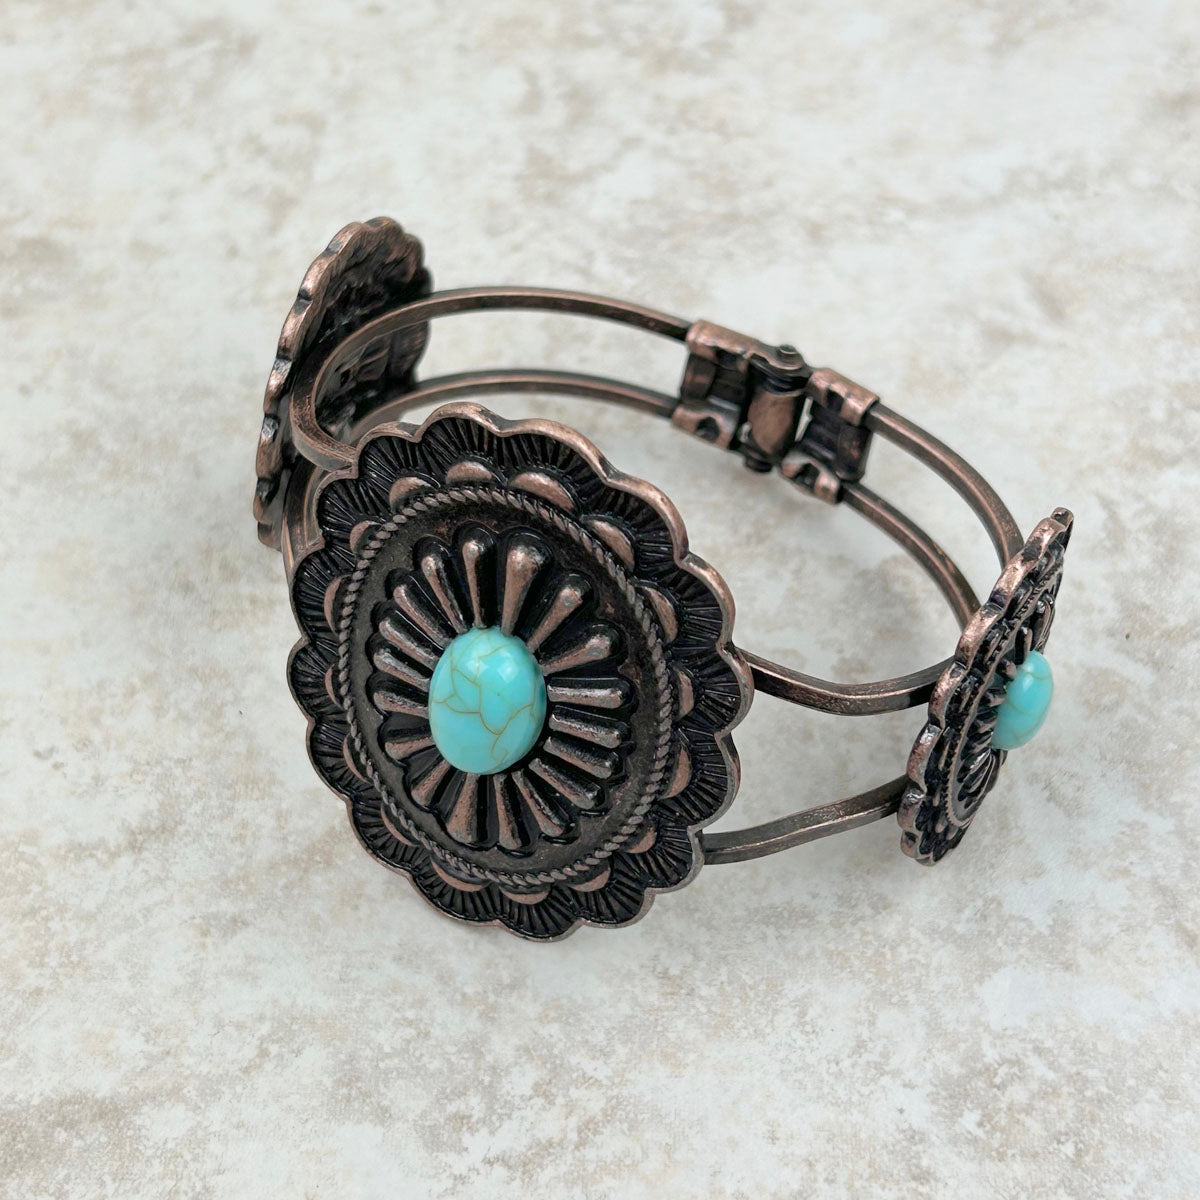 Three cooper concho with blue turquoise stone Bracelet